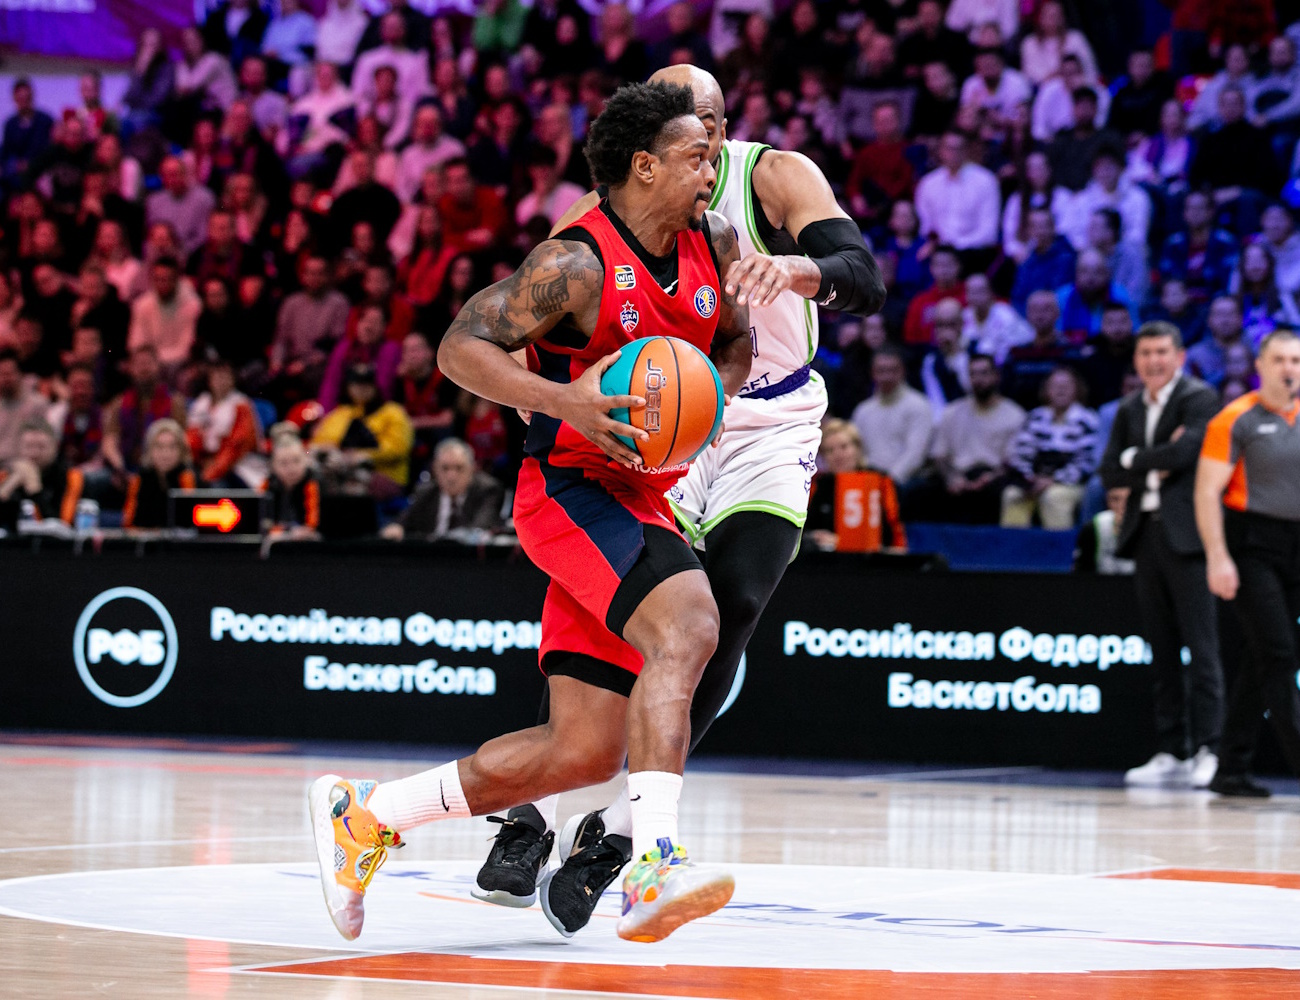 Casper Ware became the key player of the Moscow derby with 22 points and 6 assists